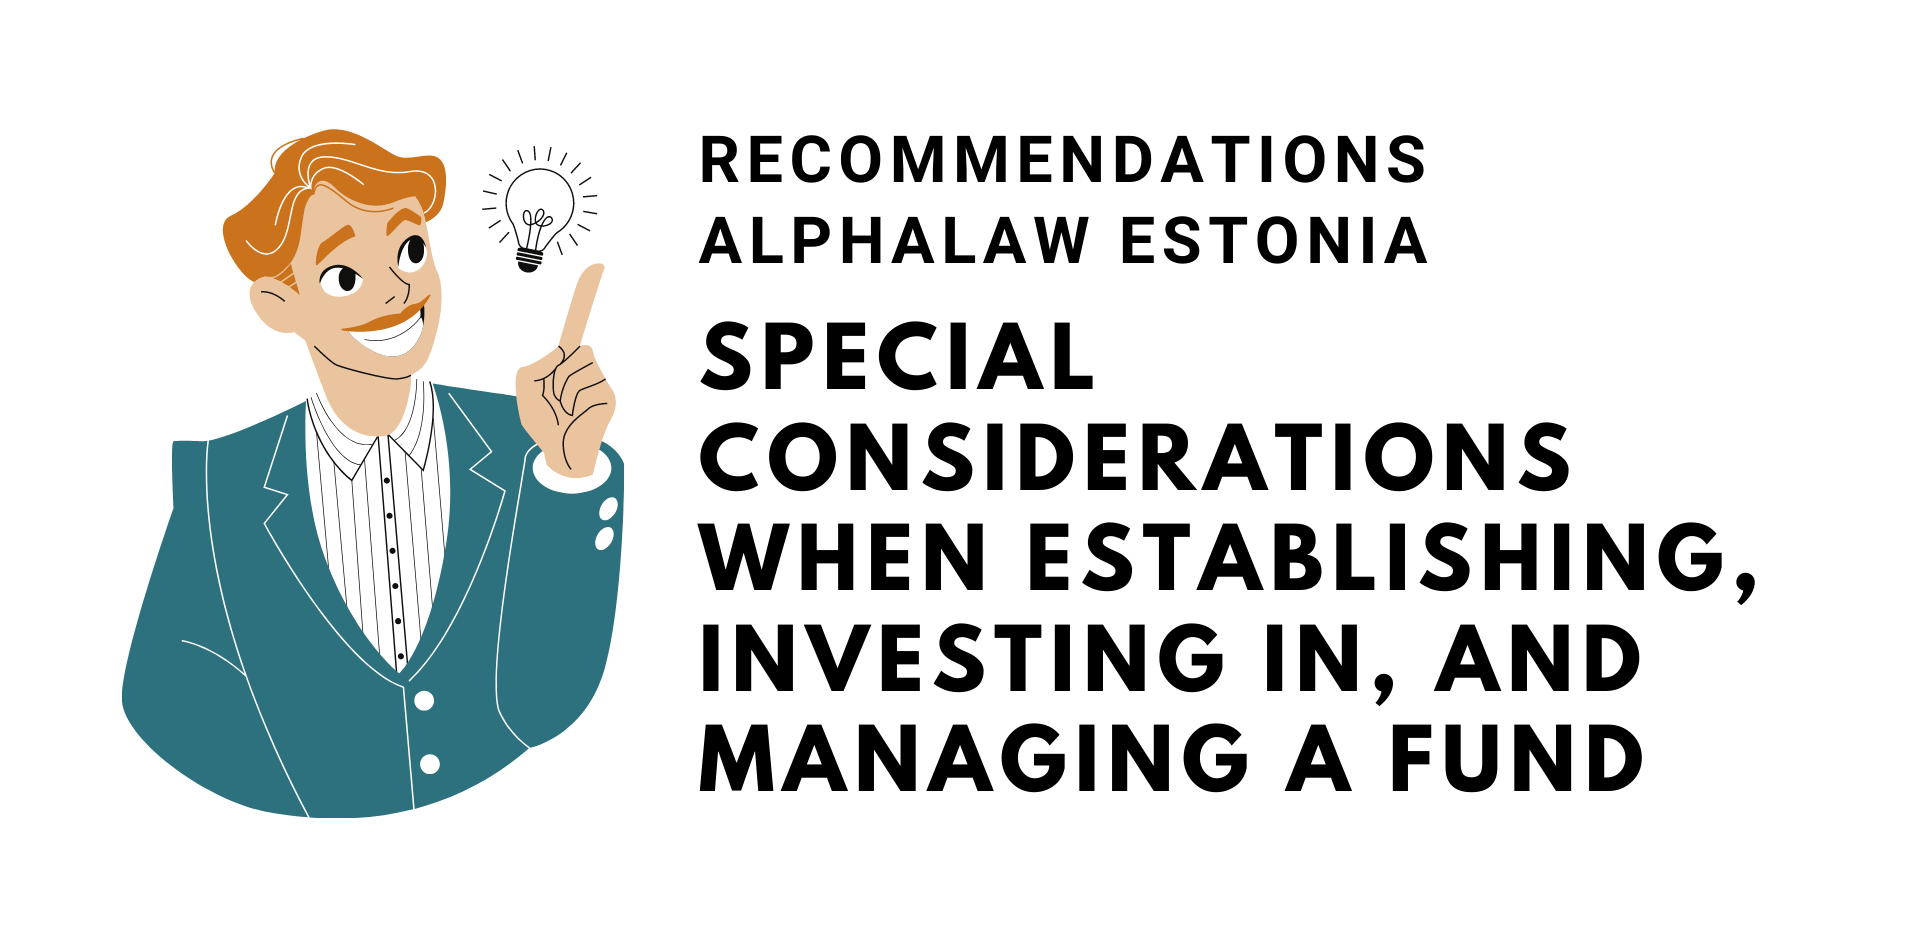 Special Considerations When Establishing, Investing in, and Managing a Fund